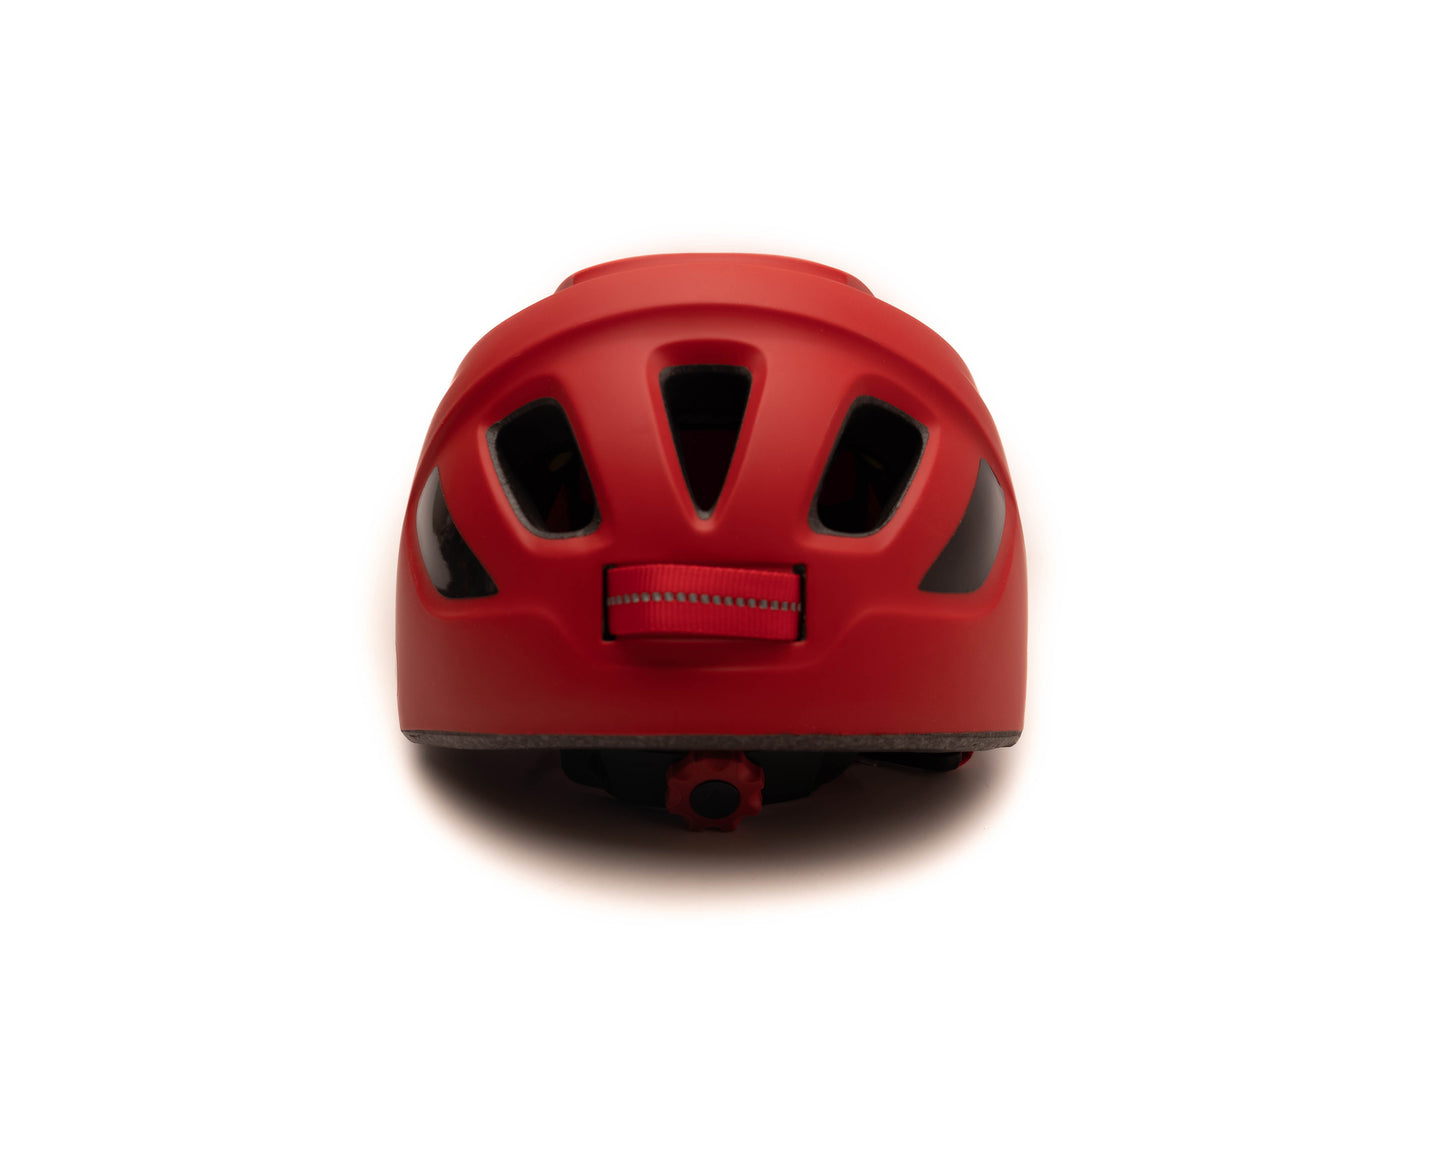 Specialized Mio Helmet Mips Cpsc Flored Tdlr (NO)